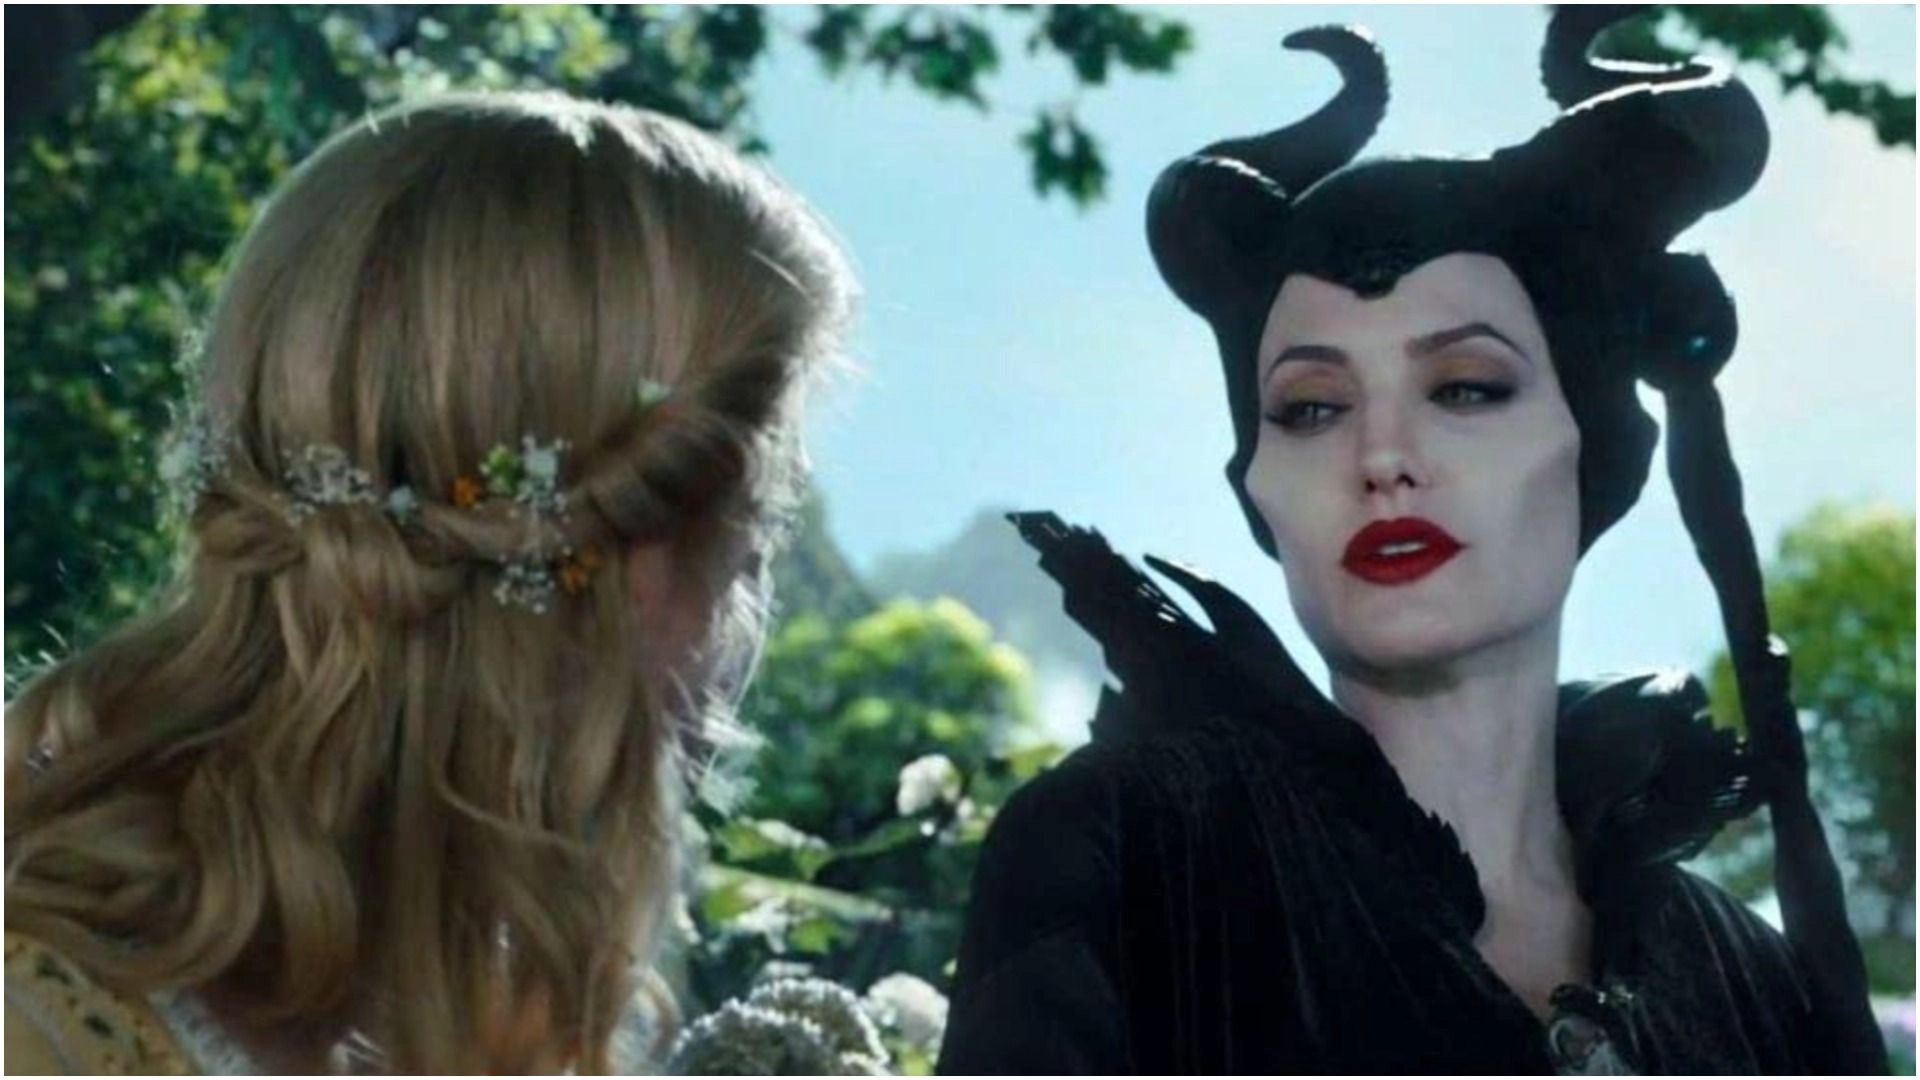 Maleficent 3 Confirmed with Angelina Jolie's Return